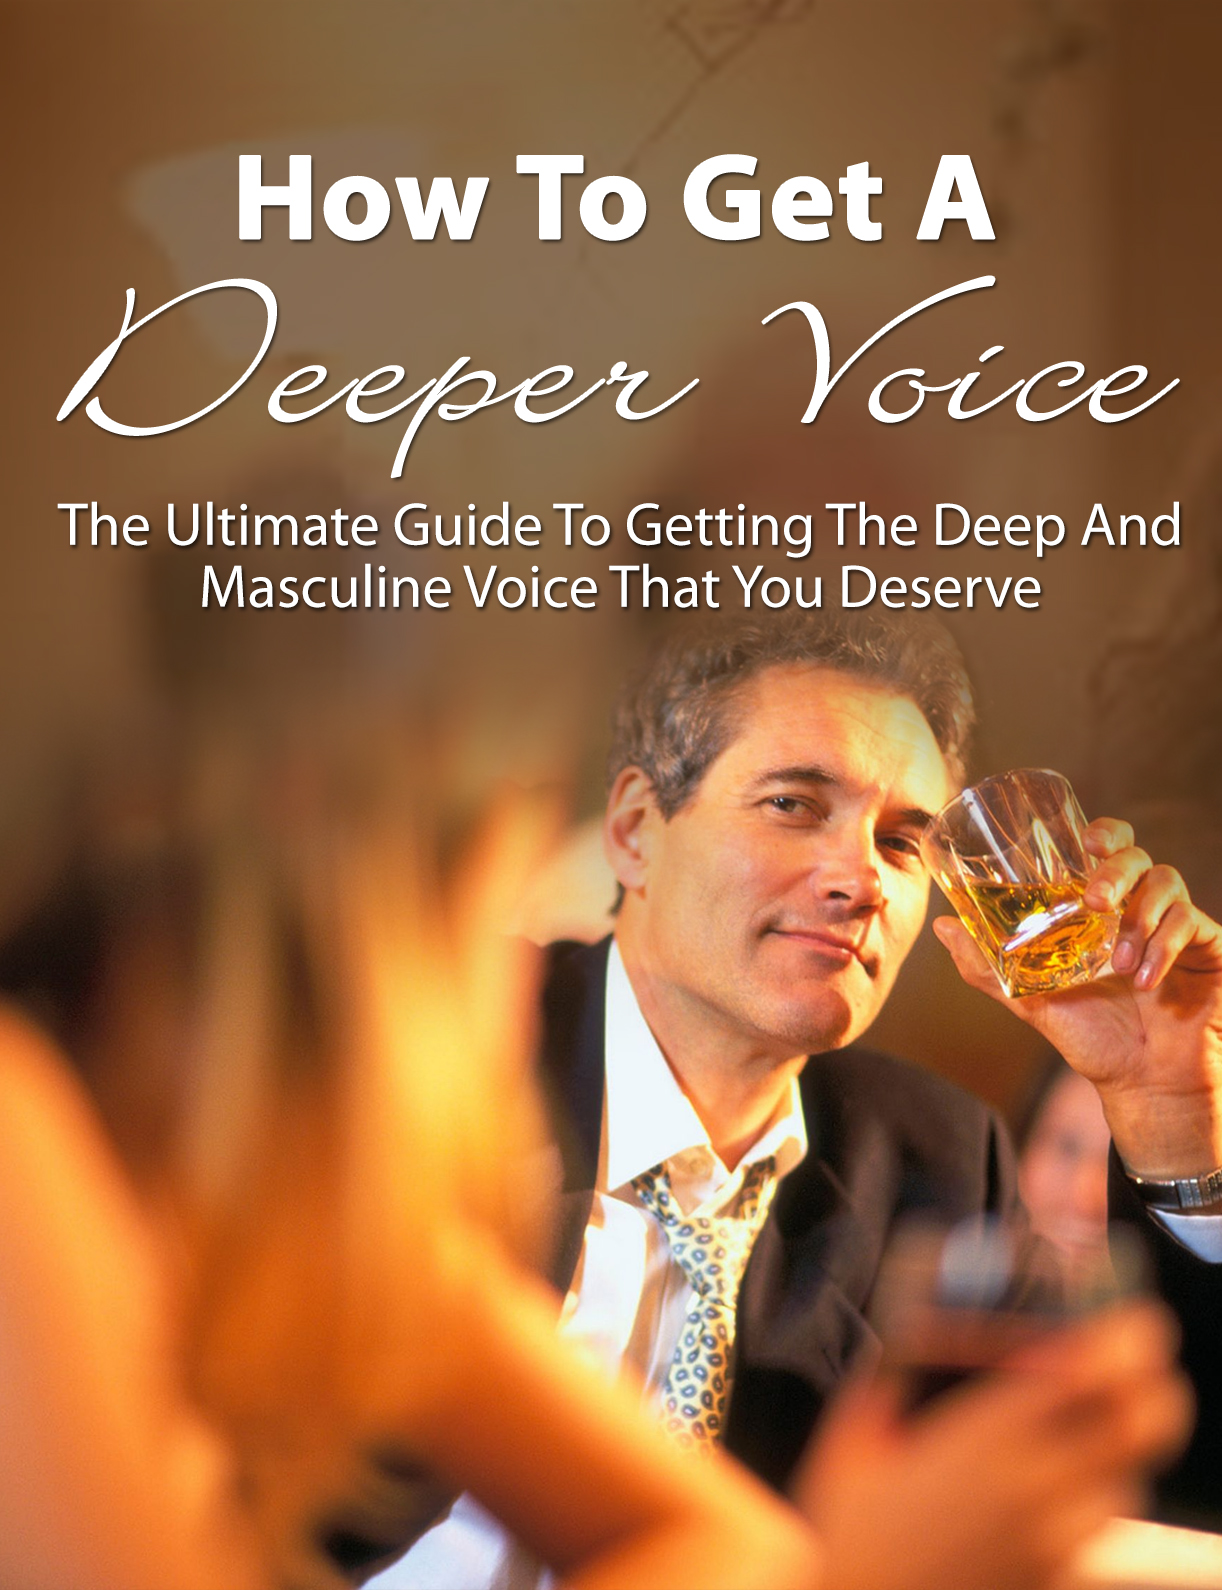 How To Get A Deeper Voice – The Ultimate Guide To Getting The Deep And Masculine Voice That You Deserve by Simon Hendrix